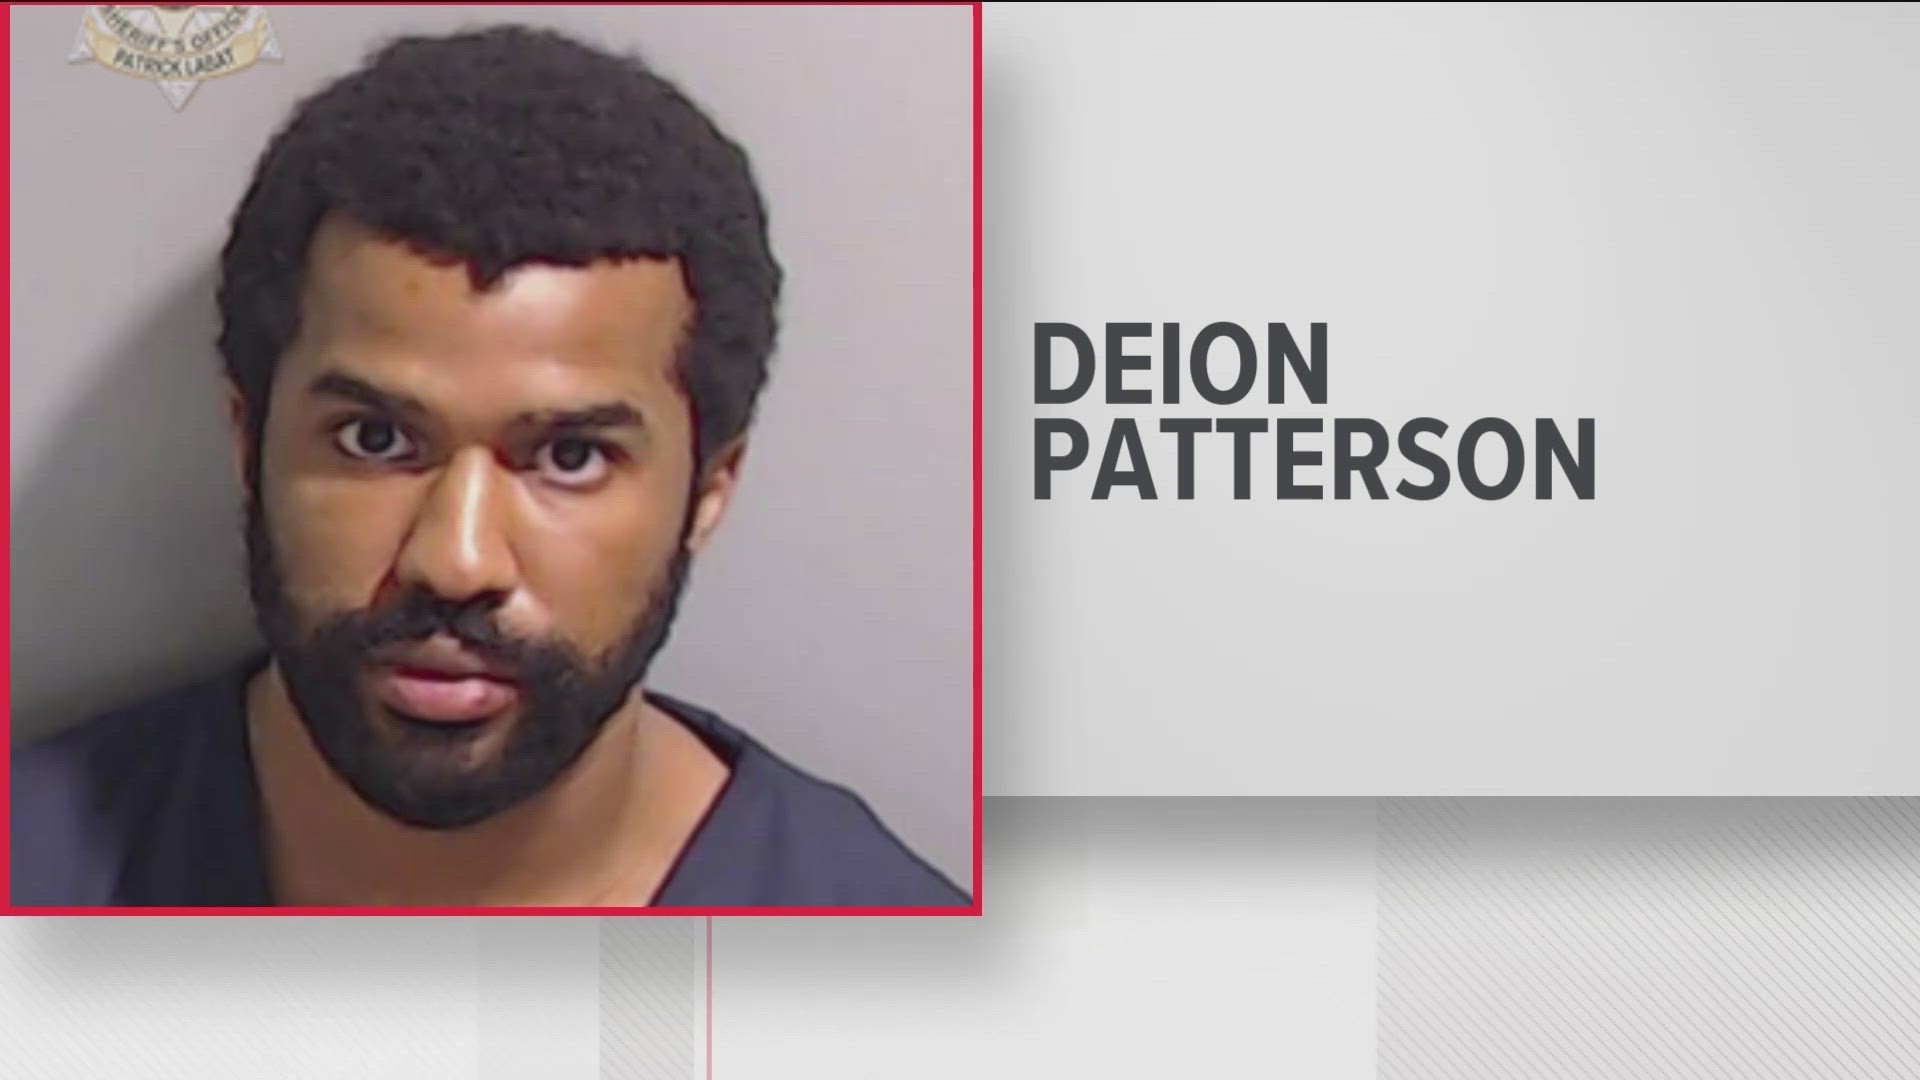 Deion Patterson, a 24-year-old man, was identified by APD as the suspect in the Northside Medical Midtown shooting.